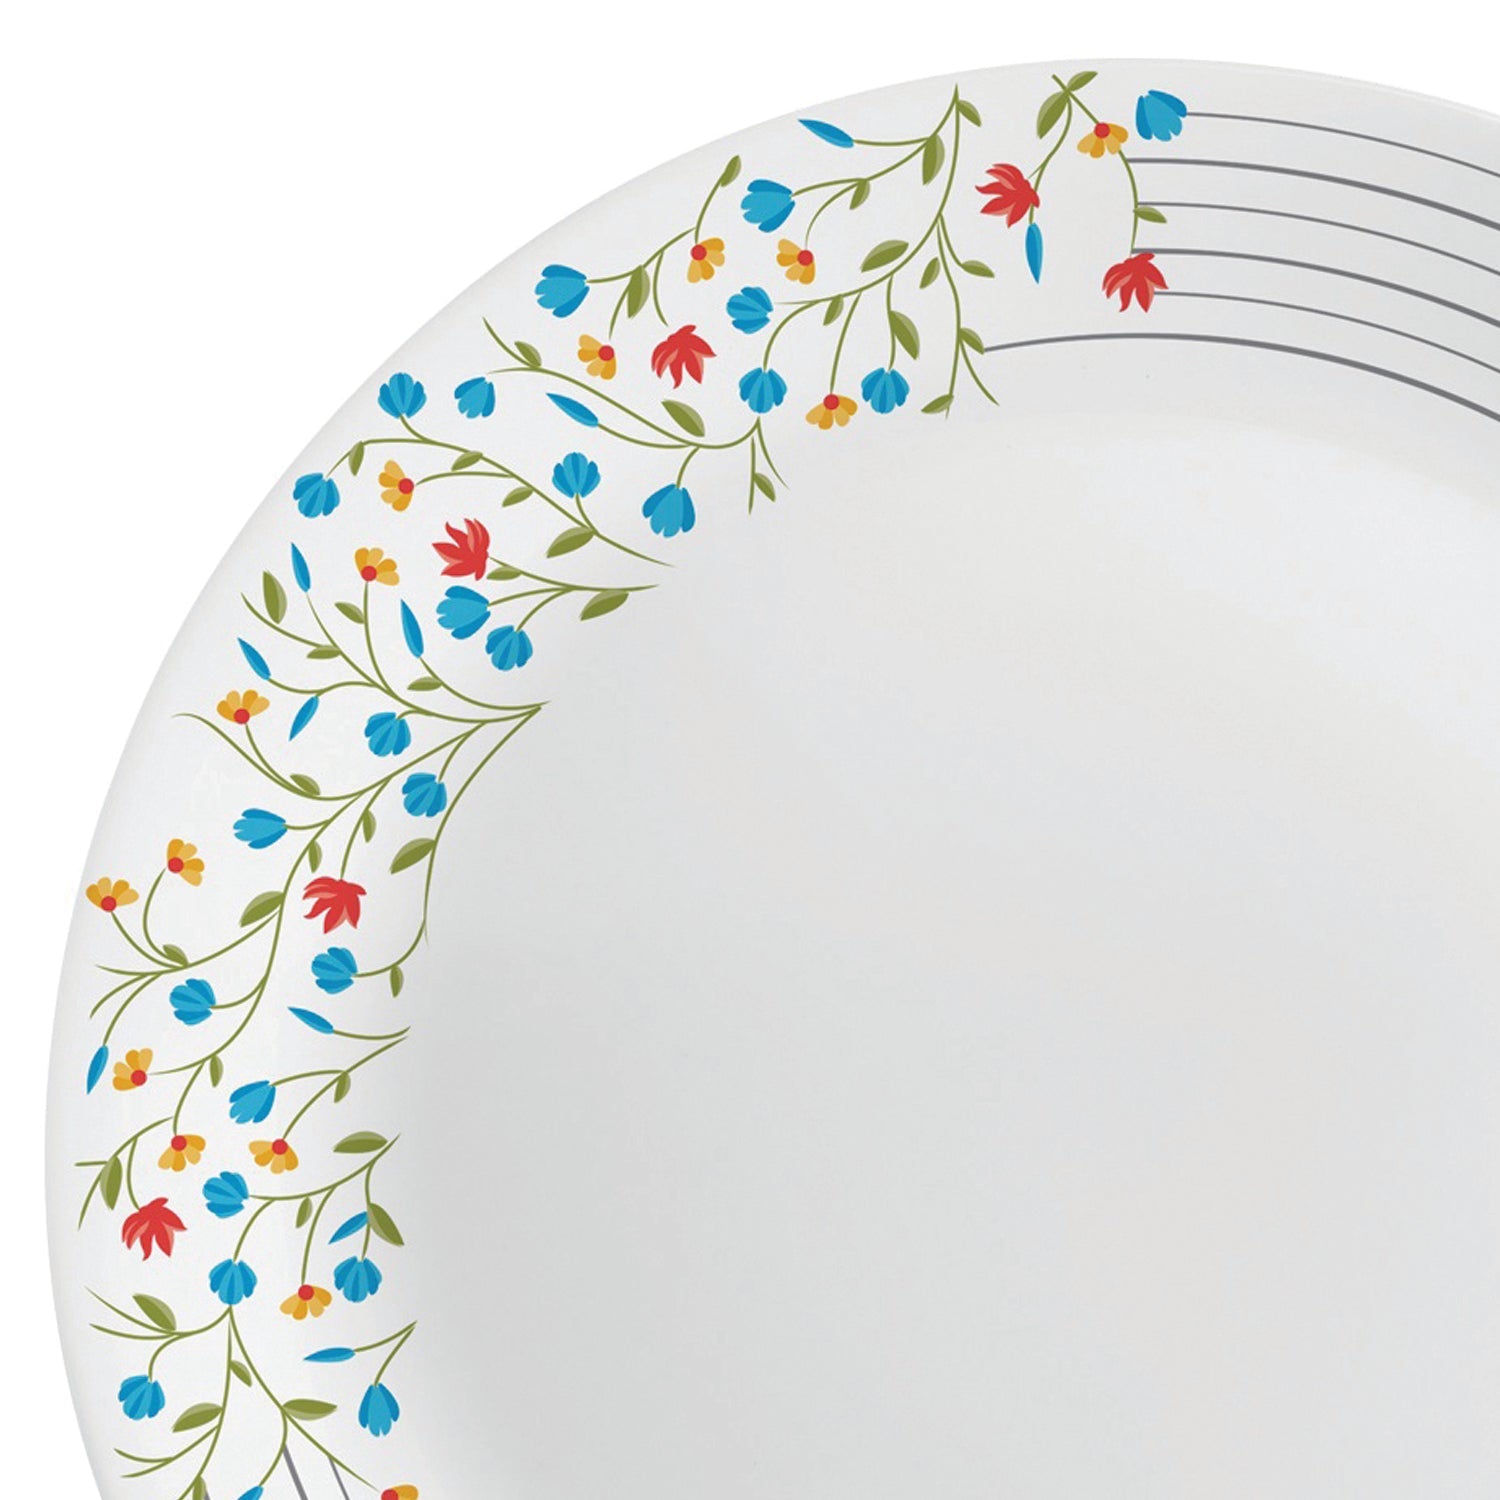 A 27-piece Opalware Dinner set: Plates, bowls, and serveware adorned with delicate floral designs for elegant dining